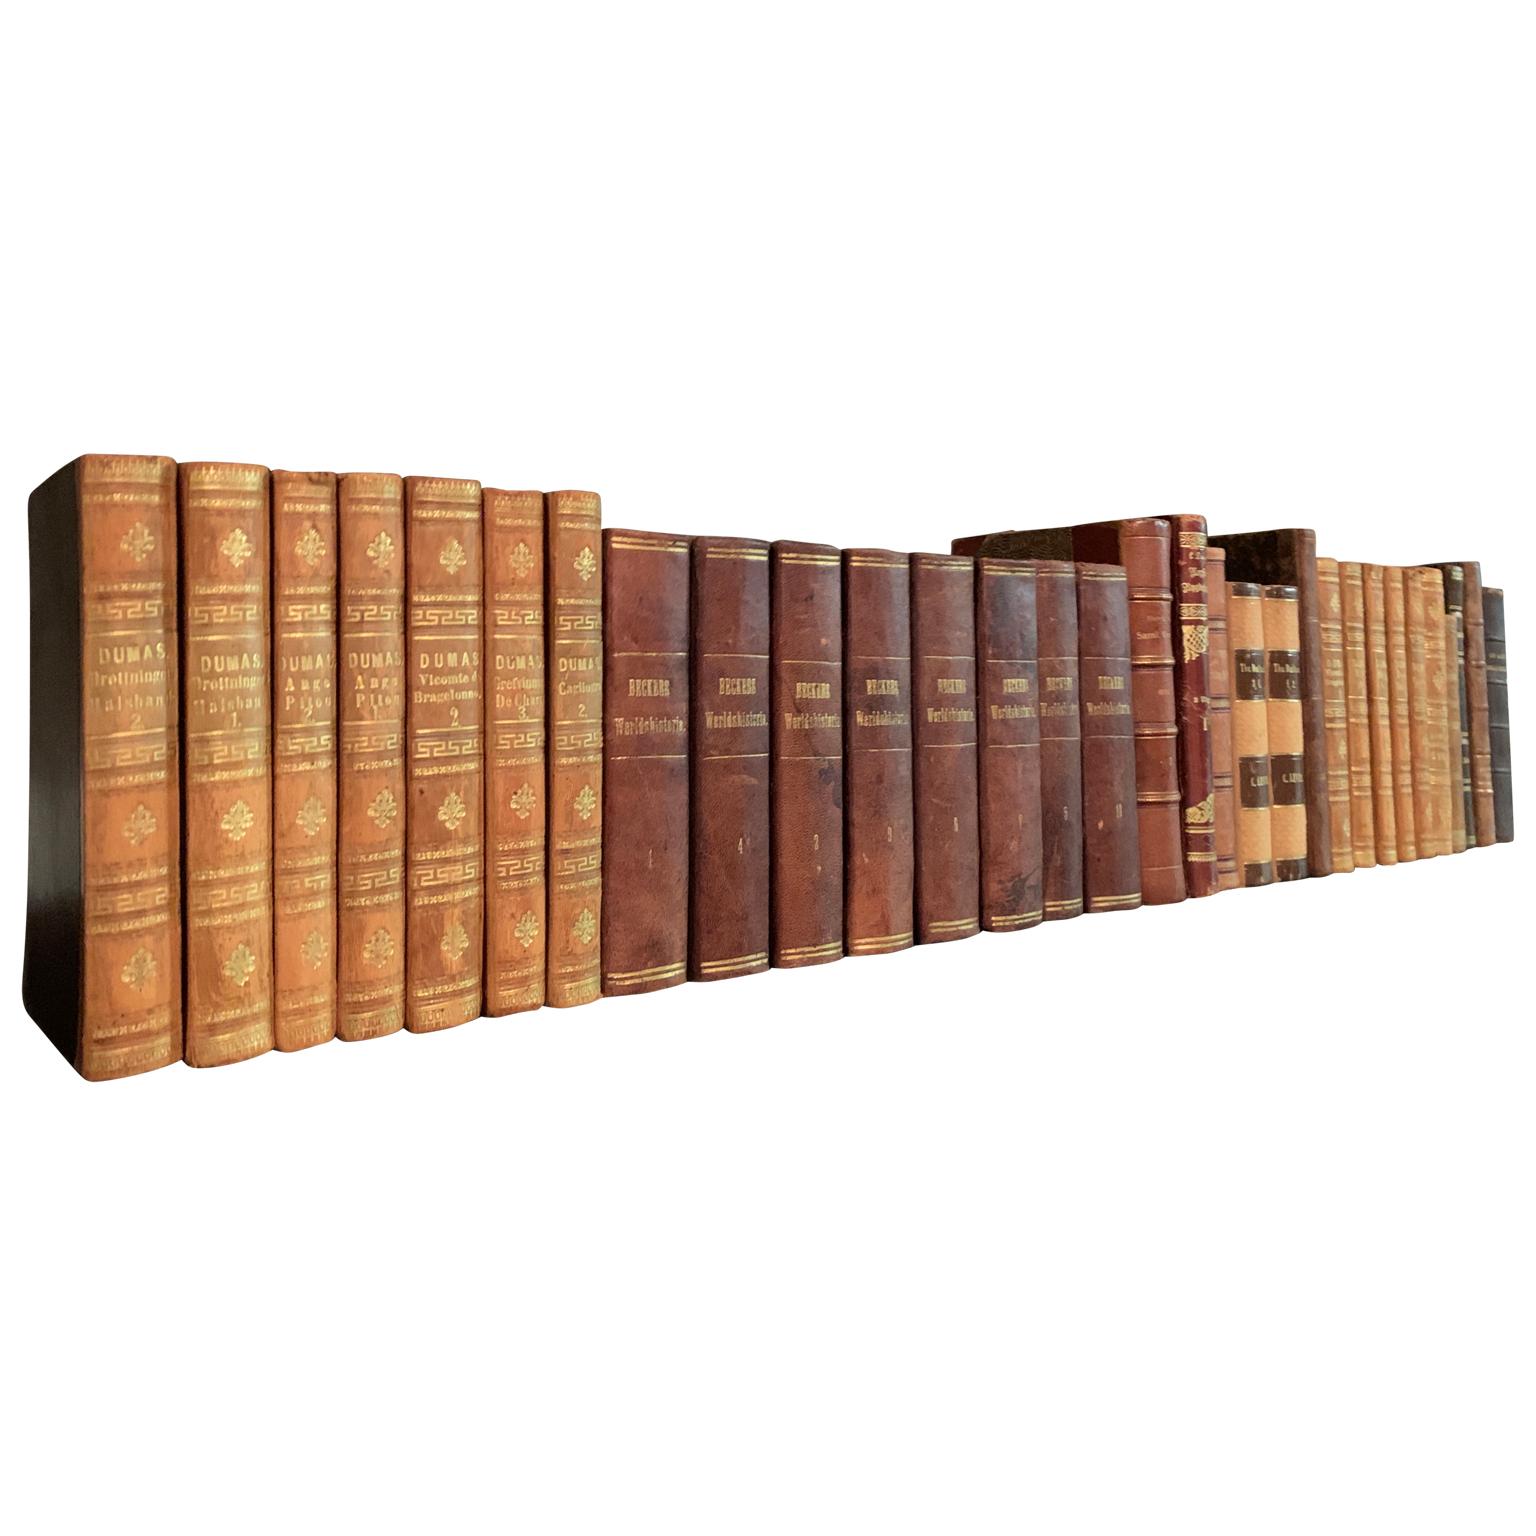 A collection of 19 European decorative antique leather-bound library books dated from 1832-1908.
This lot of books is from the following four European countries; Denmark, Sweden, France and Great Britain. The books are wrapped in leather-bound